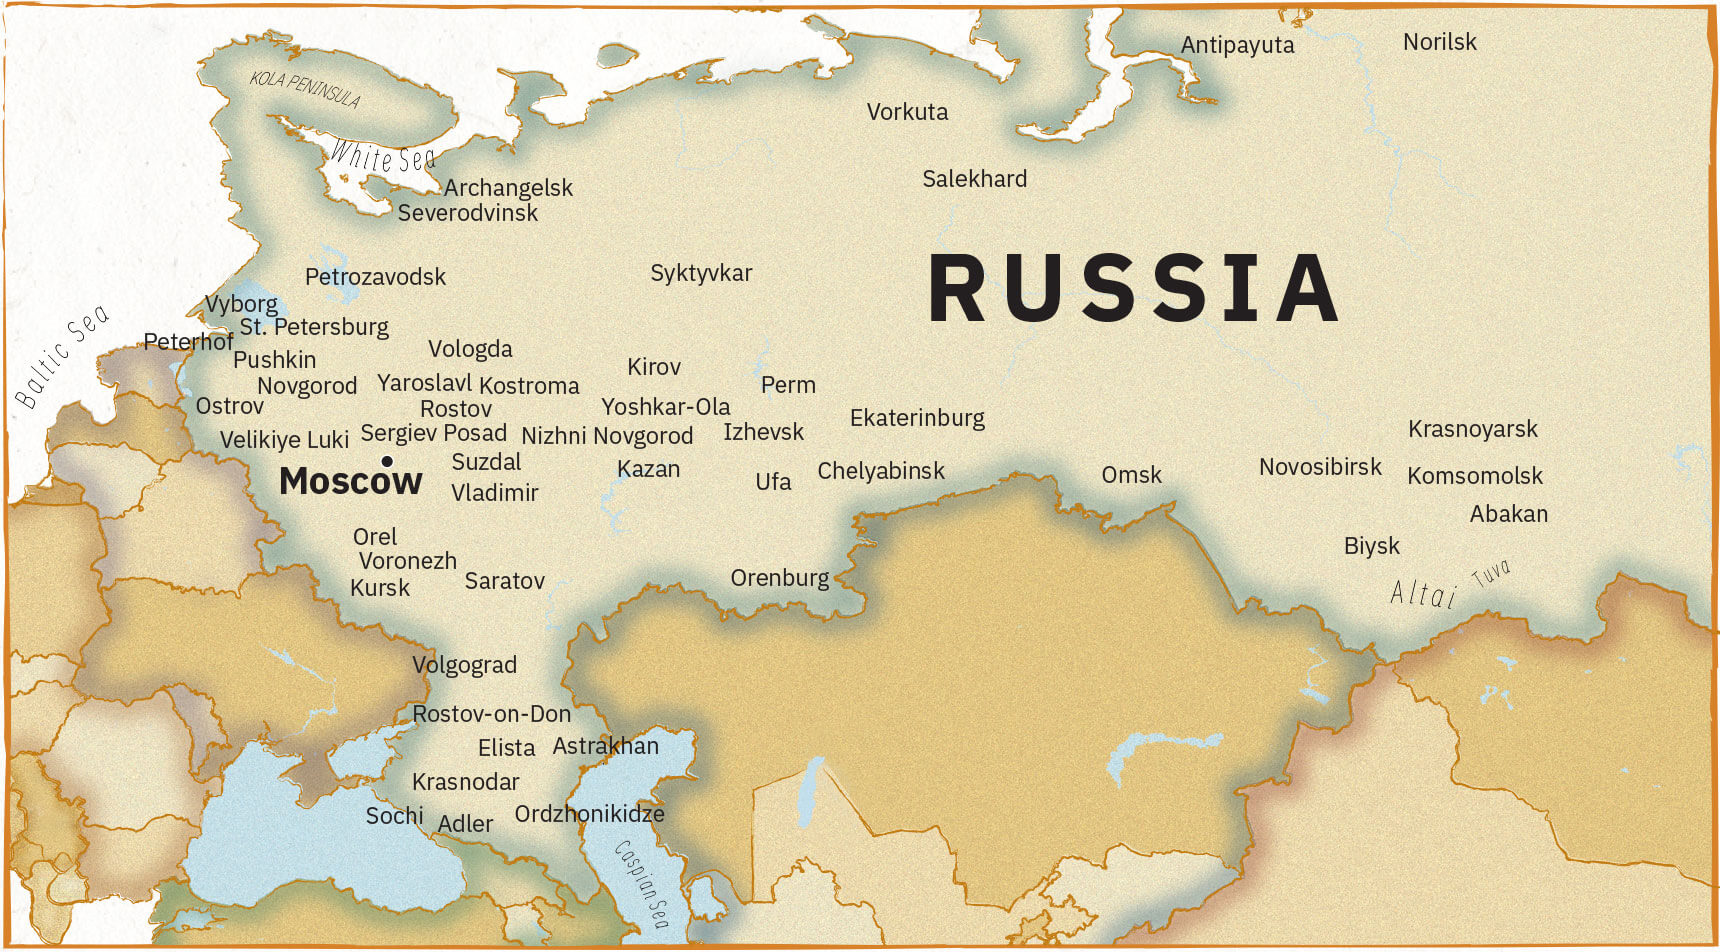 Western Russia. Map Western Russia. West Russia Map. Russian West на карте. Russia is western